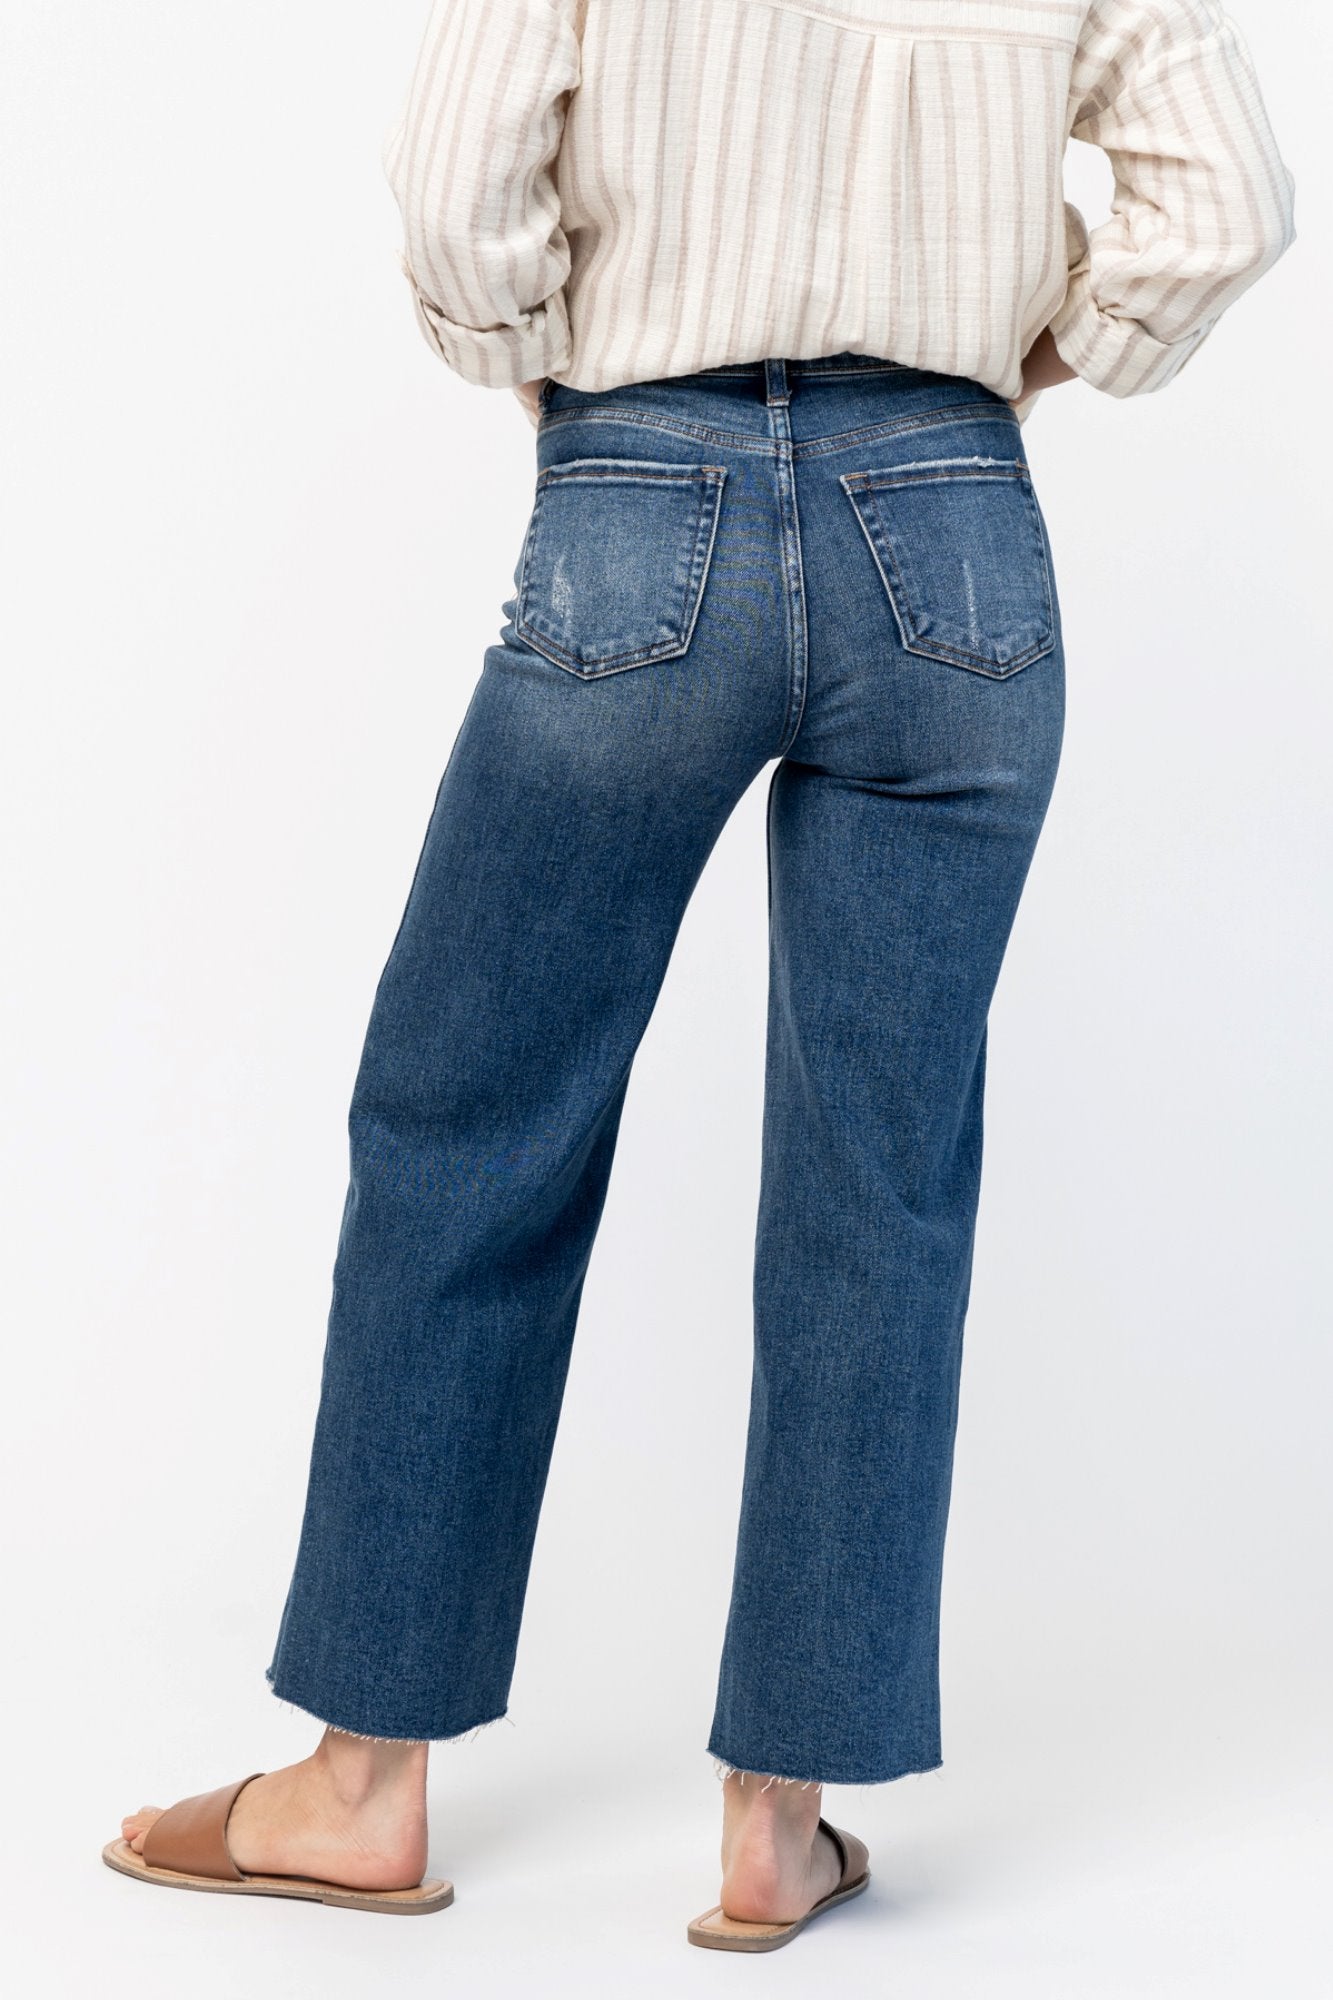 Roo Jeans Clothing Holley Girl 